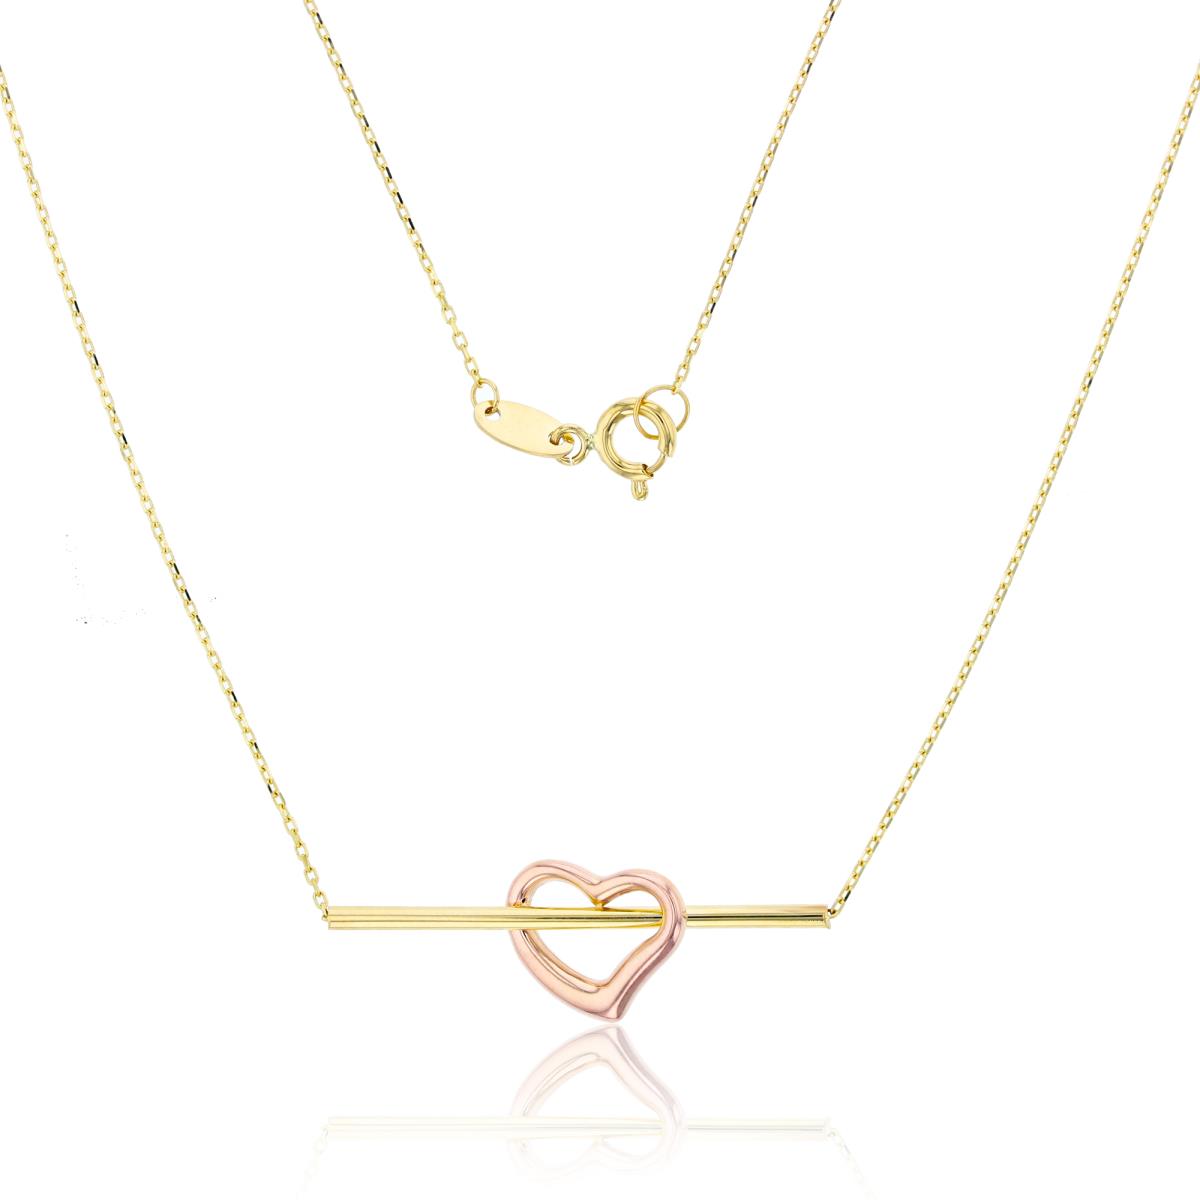 10K Yellow & Rose Gold Polished Heart & Tube 18" Necklace